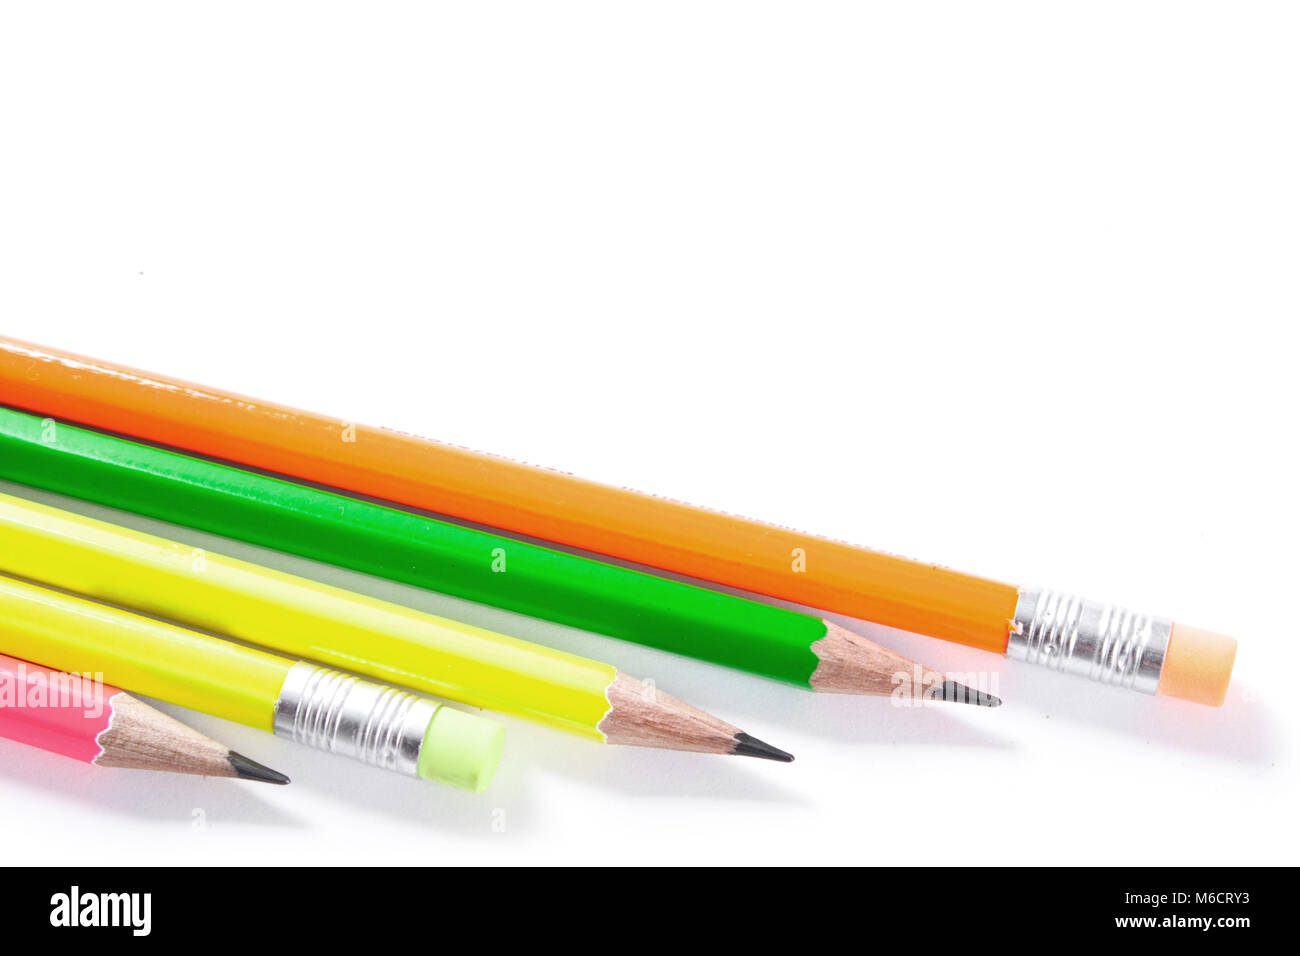 Colorful pencils, Lead pencils isolated on white. Stock Photo